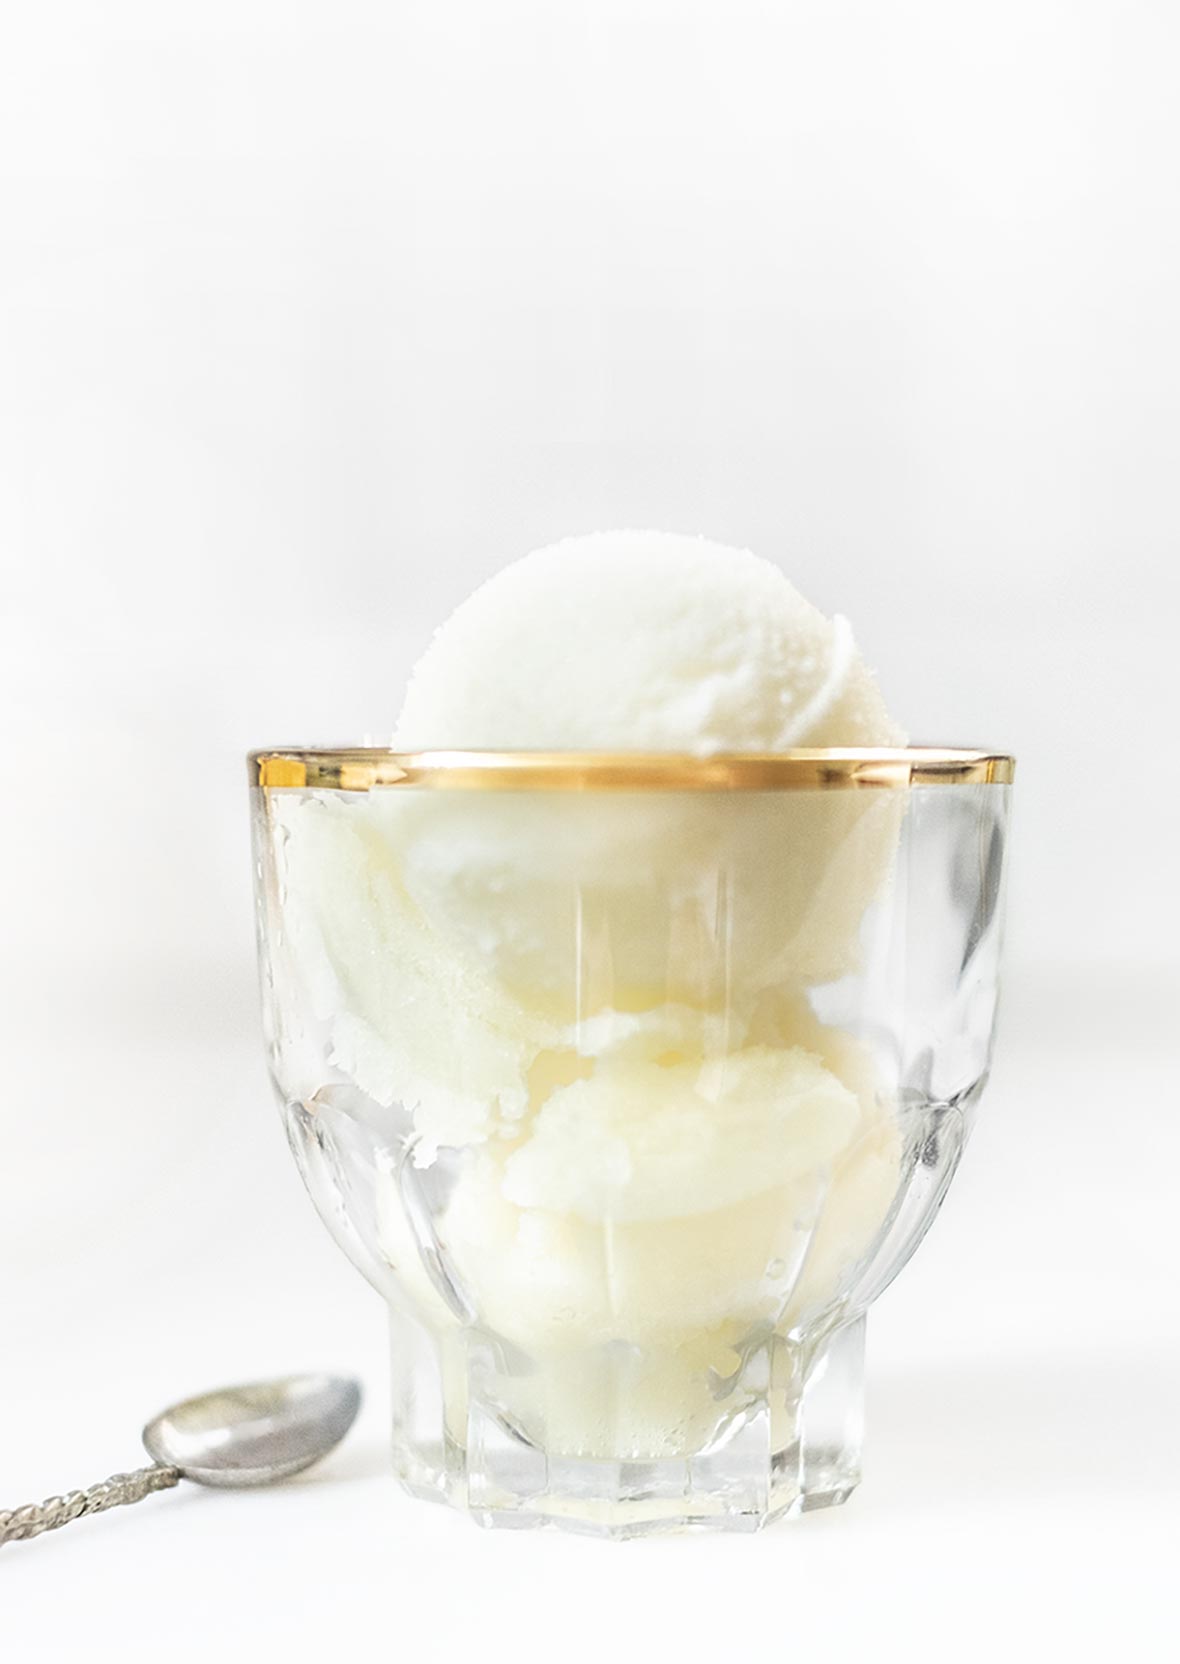 A small glass serving bowl with two scoops of tart lemon sorbet.